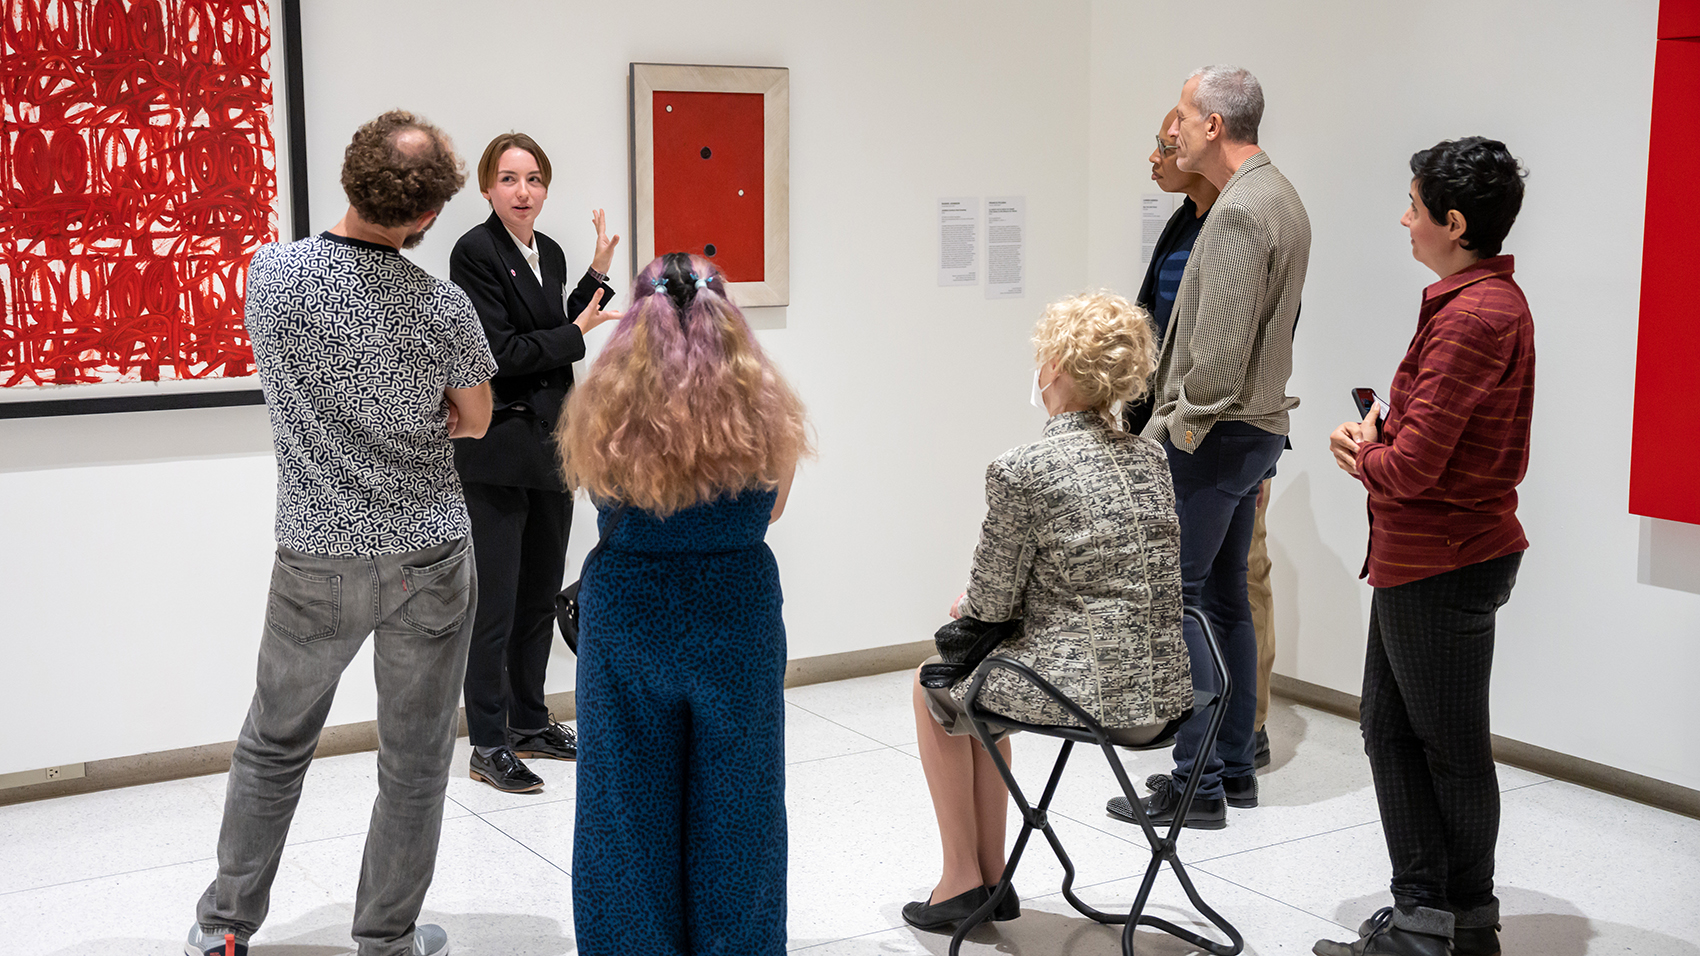 A small group gathers for a gallery talk, surrounded by red abstract paintings